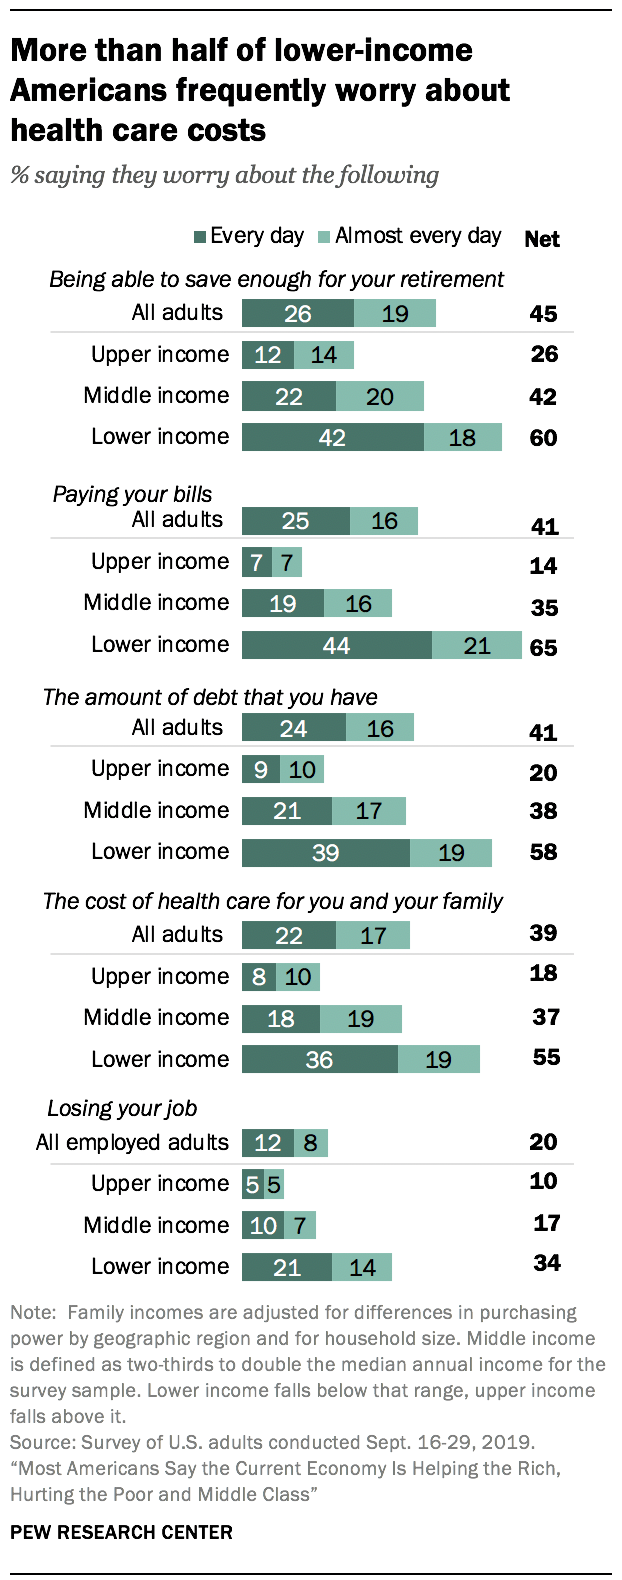 More than half of lower-income Americans frequently worry about health care costs